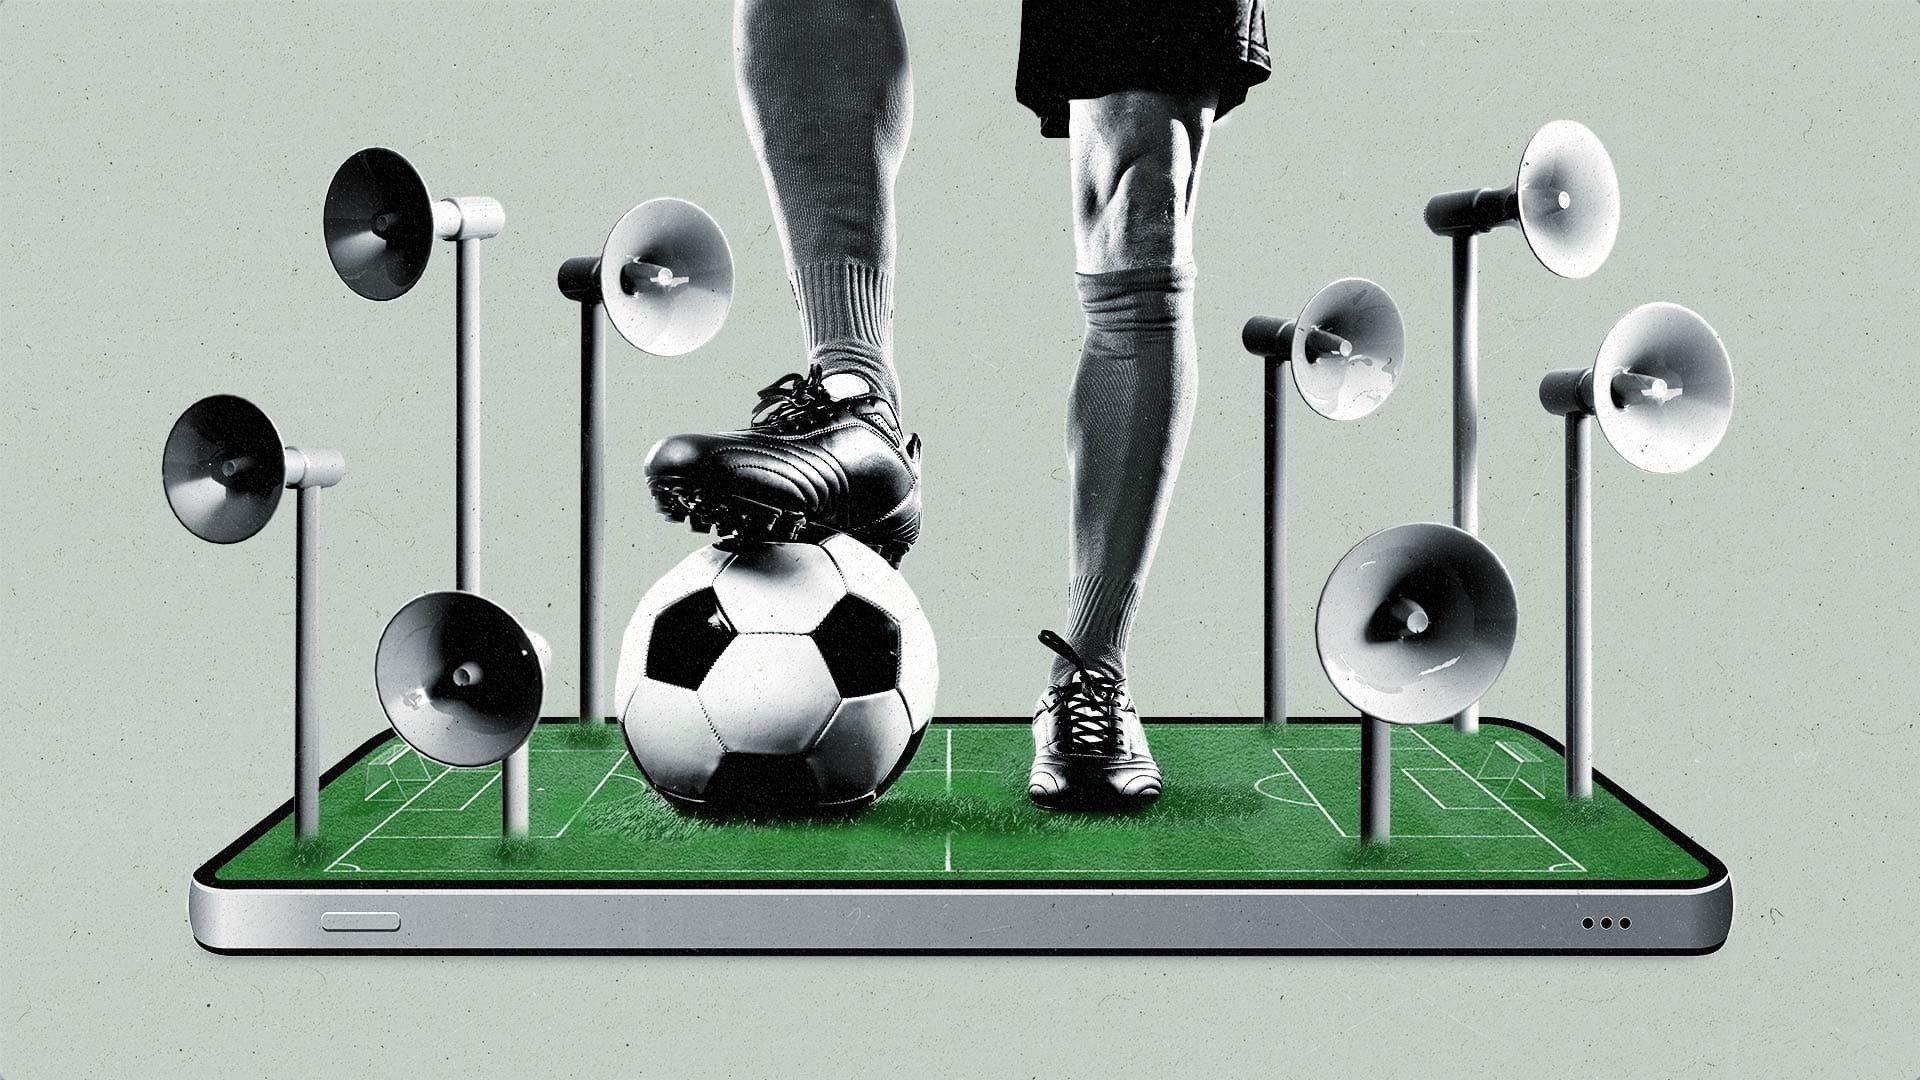 A female soccer player's foot sits on a soccer ball as she stands on a smartphone with multiple megaphones emerging from it.